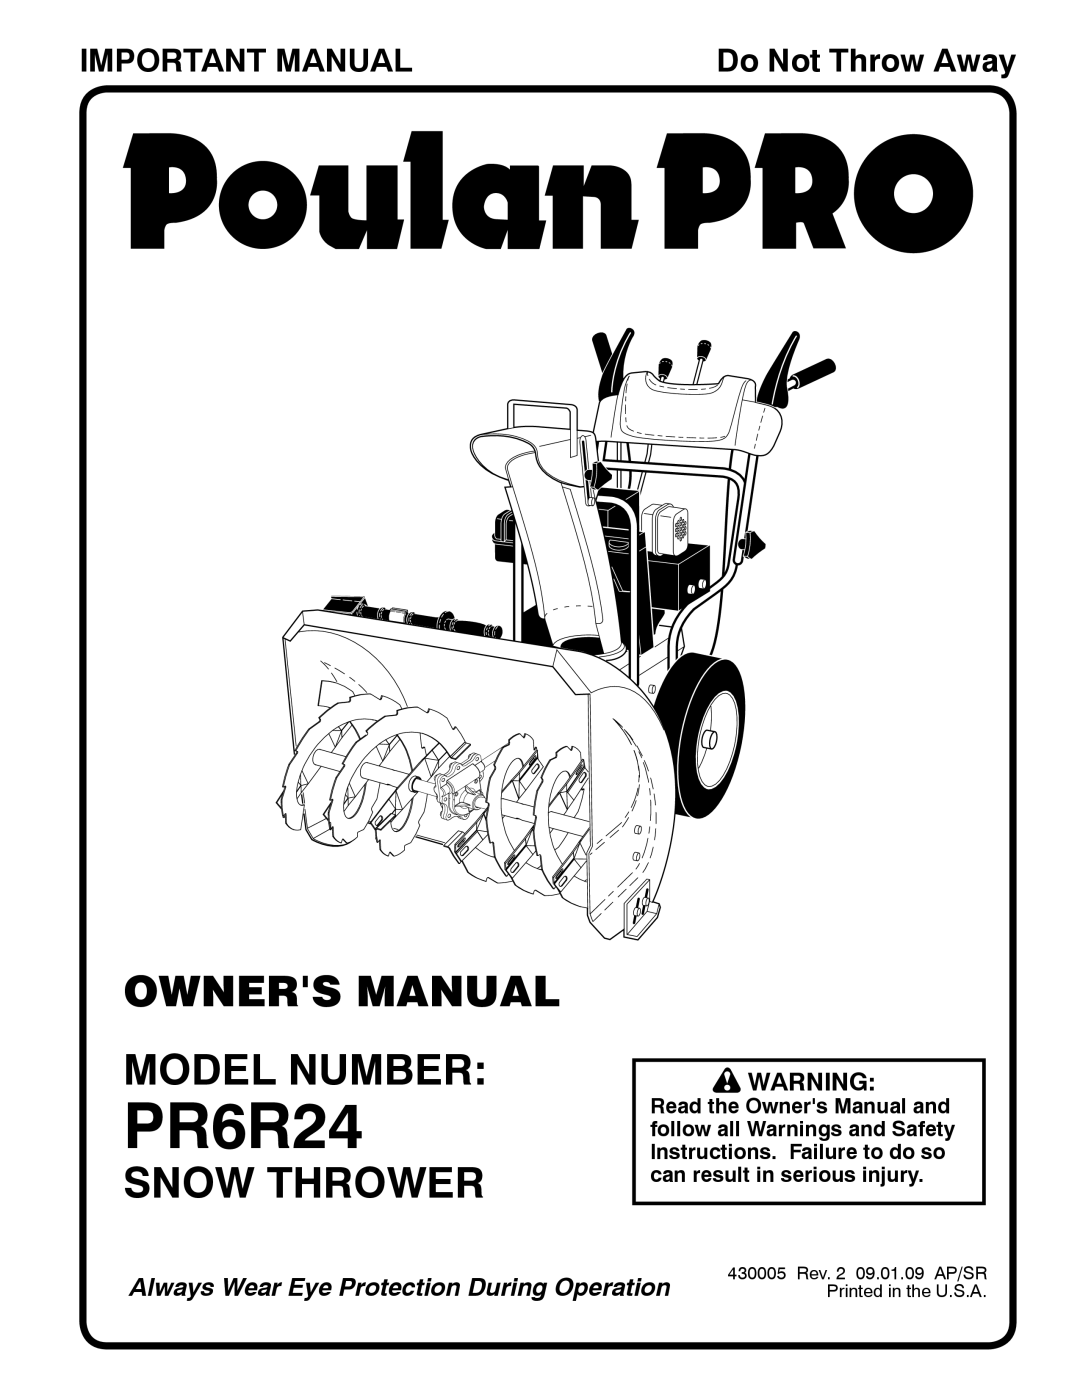 Poulan 96192002801 owner manual Owners Manual Model Number, Snow Thrower, Important Manual, PR6R24, Do Not Throw Away 